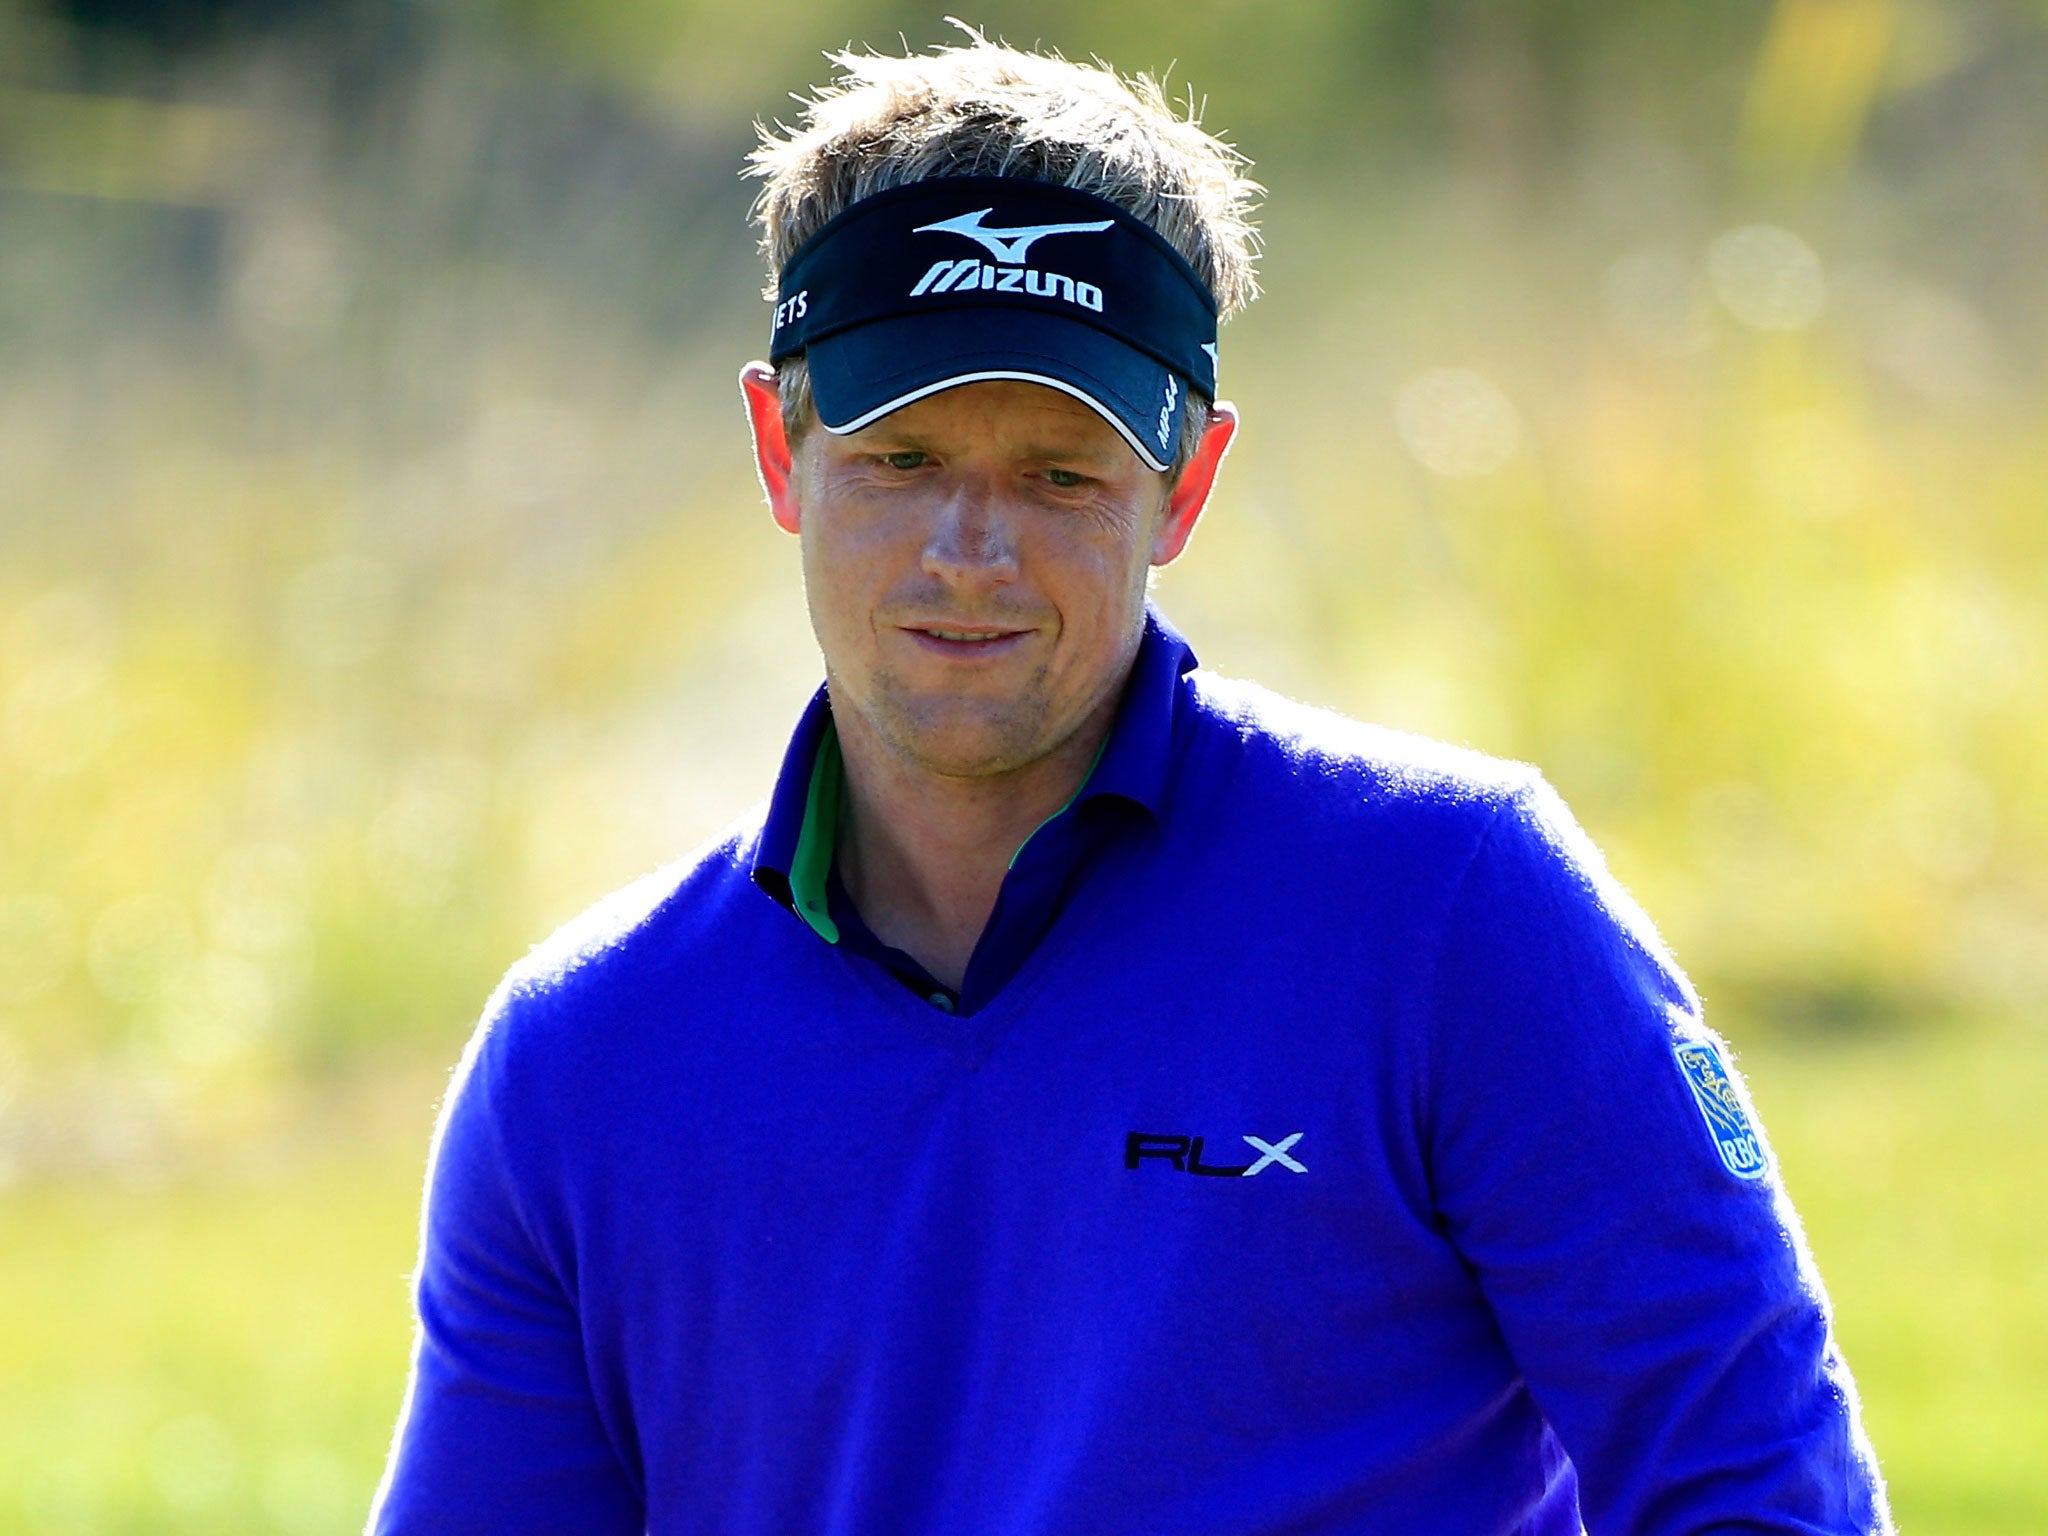 Luke Donald: A closing round of 66 saw him qualify for the PGA Tour Championship